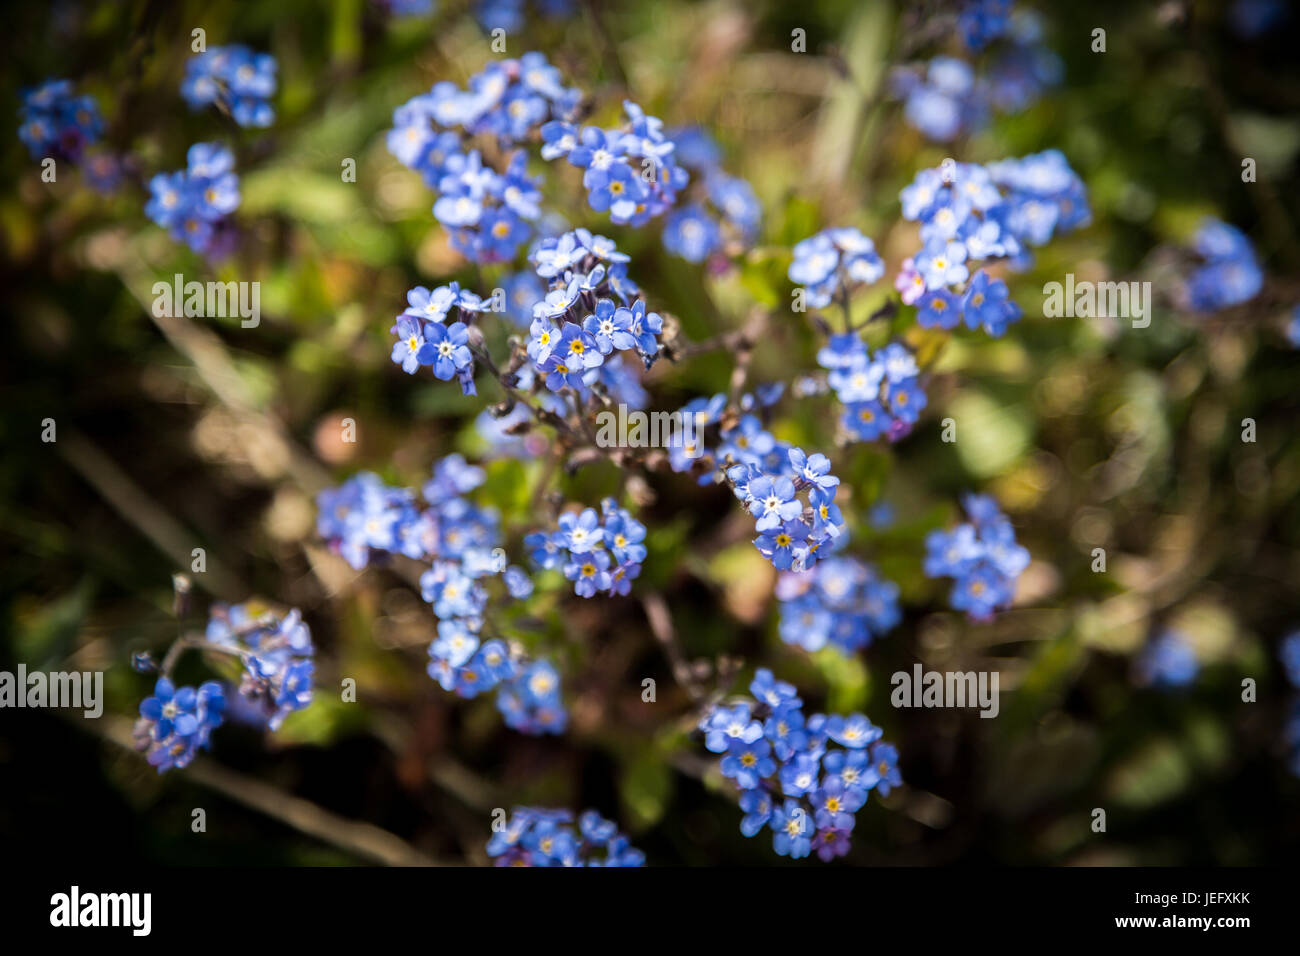 Blue Forget Me Not flowers Stock Photo